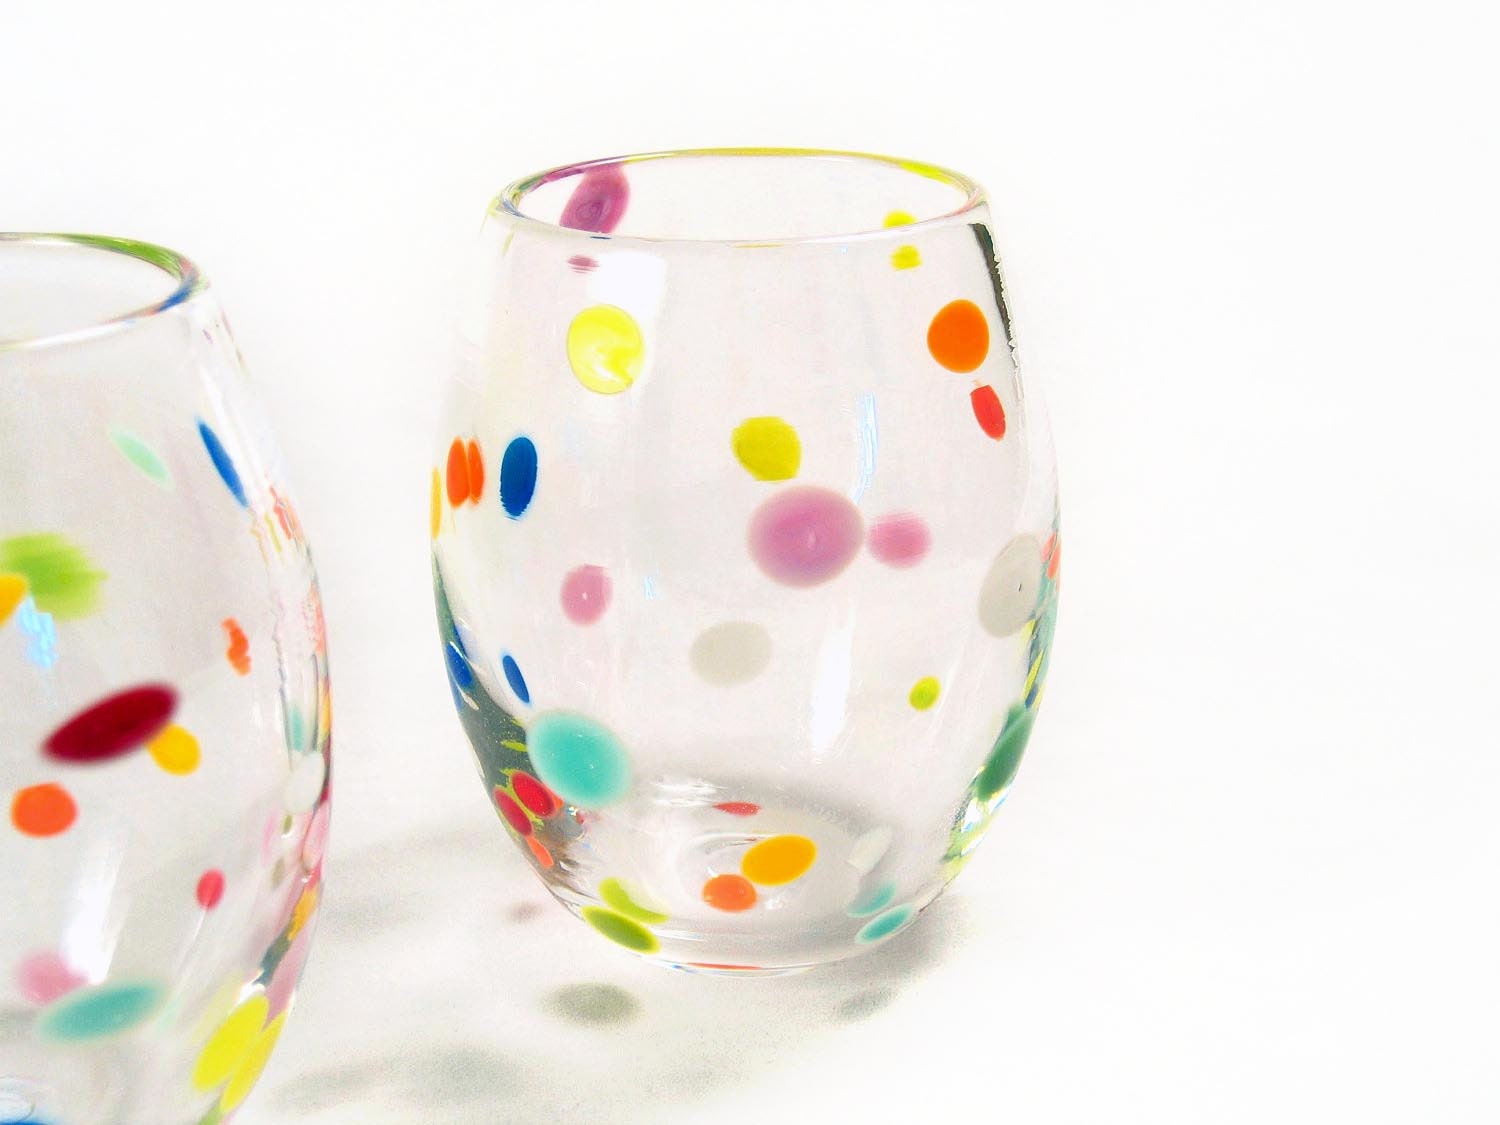 Retro Tumblers Hand Blown Glass Colorful Polka Dots Juice Glasses Summer Entertaining